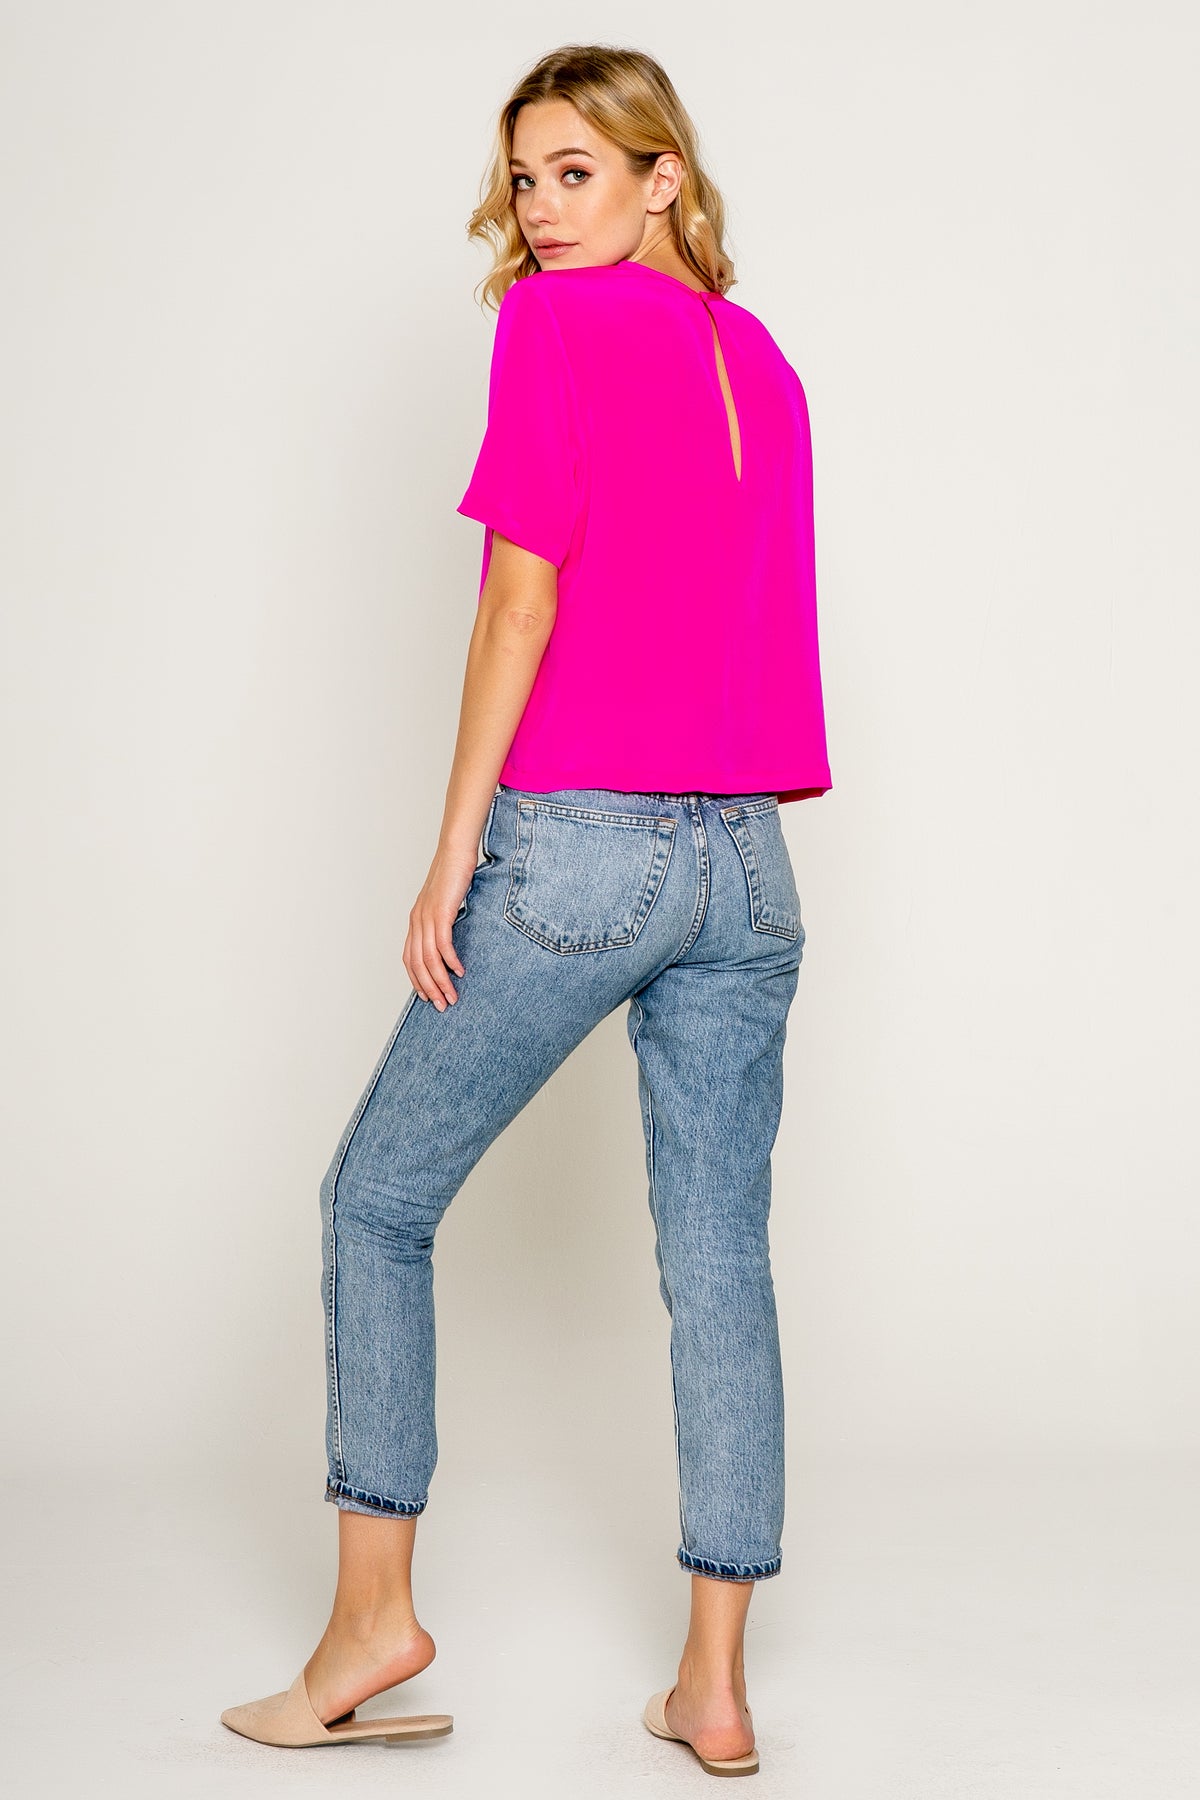 cropped-boxy-short-sleeve-silk-top-in-new-hot-pink-by-lavender-brown